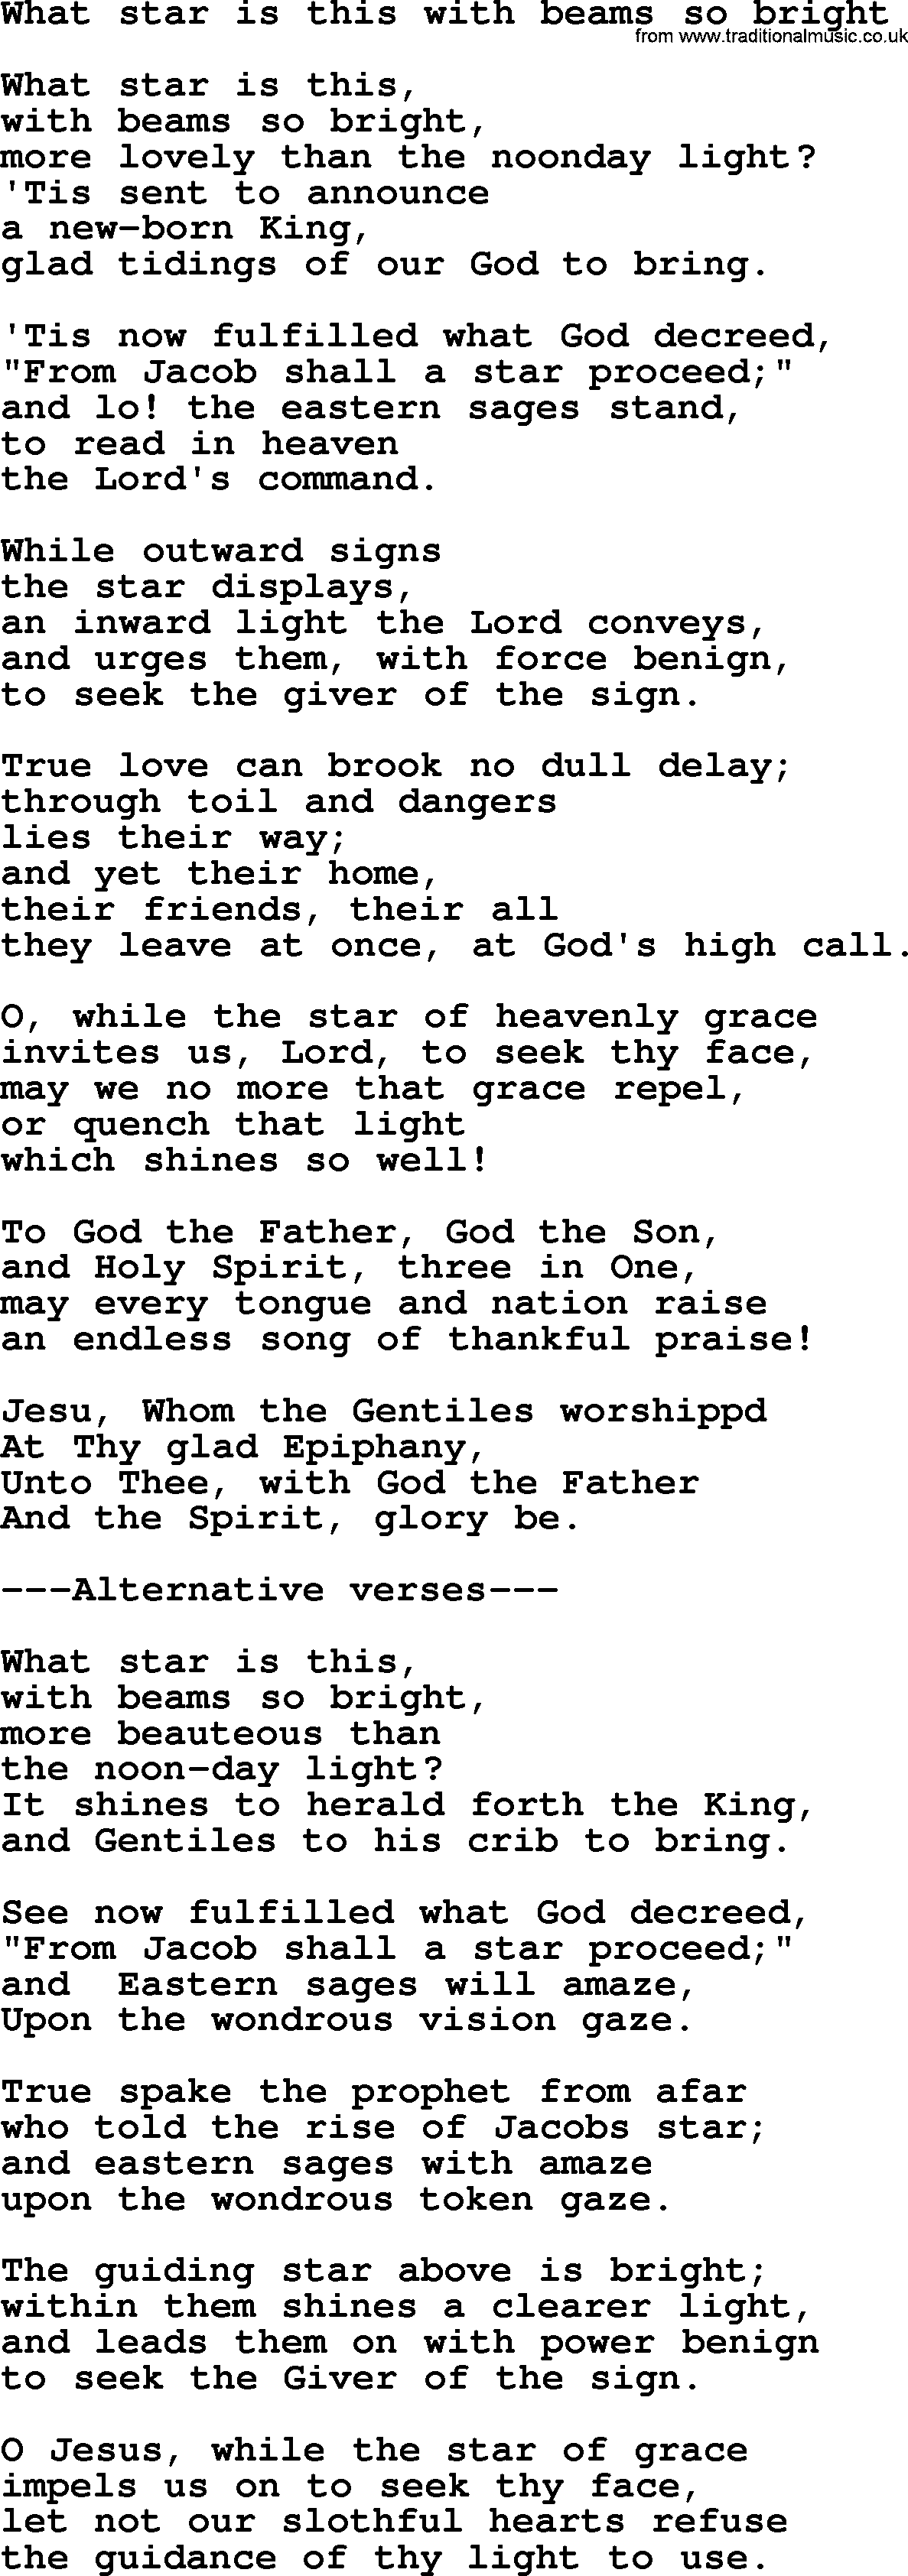 Presbyterian Hymns collection, Hymn: What Star Is This With Beams So Bright, lyrics and PDF